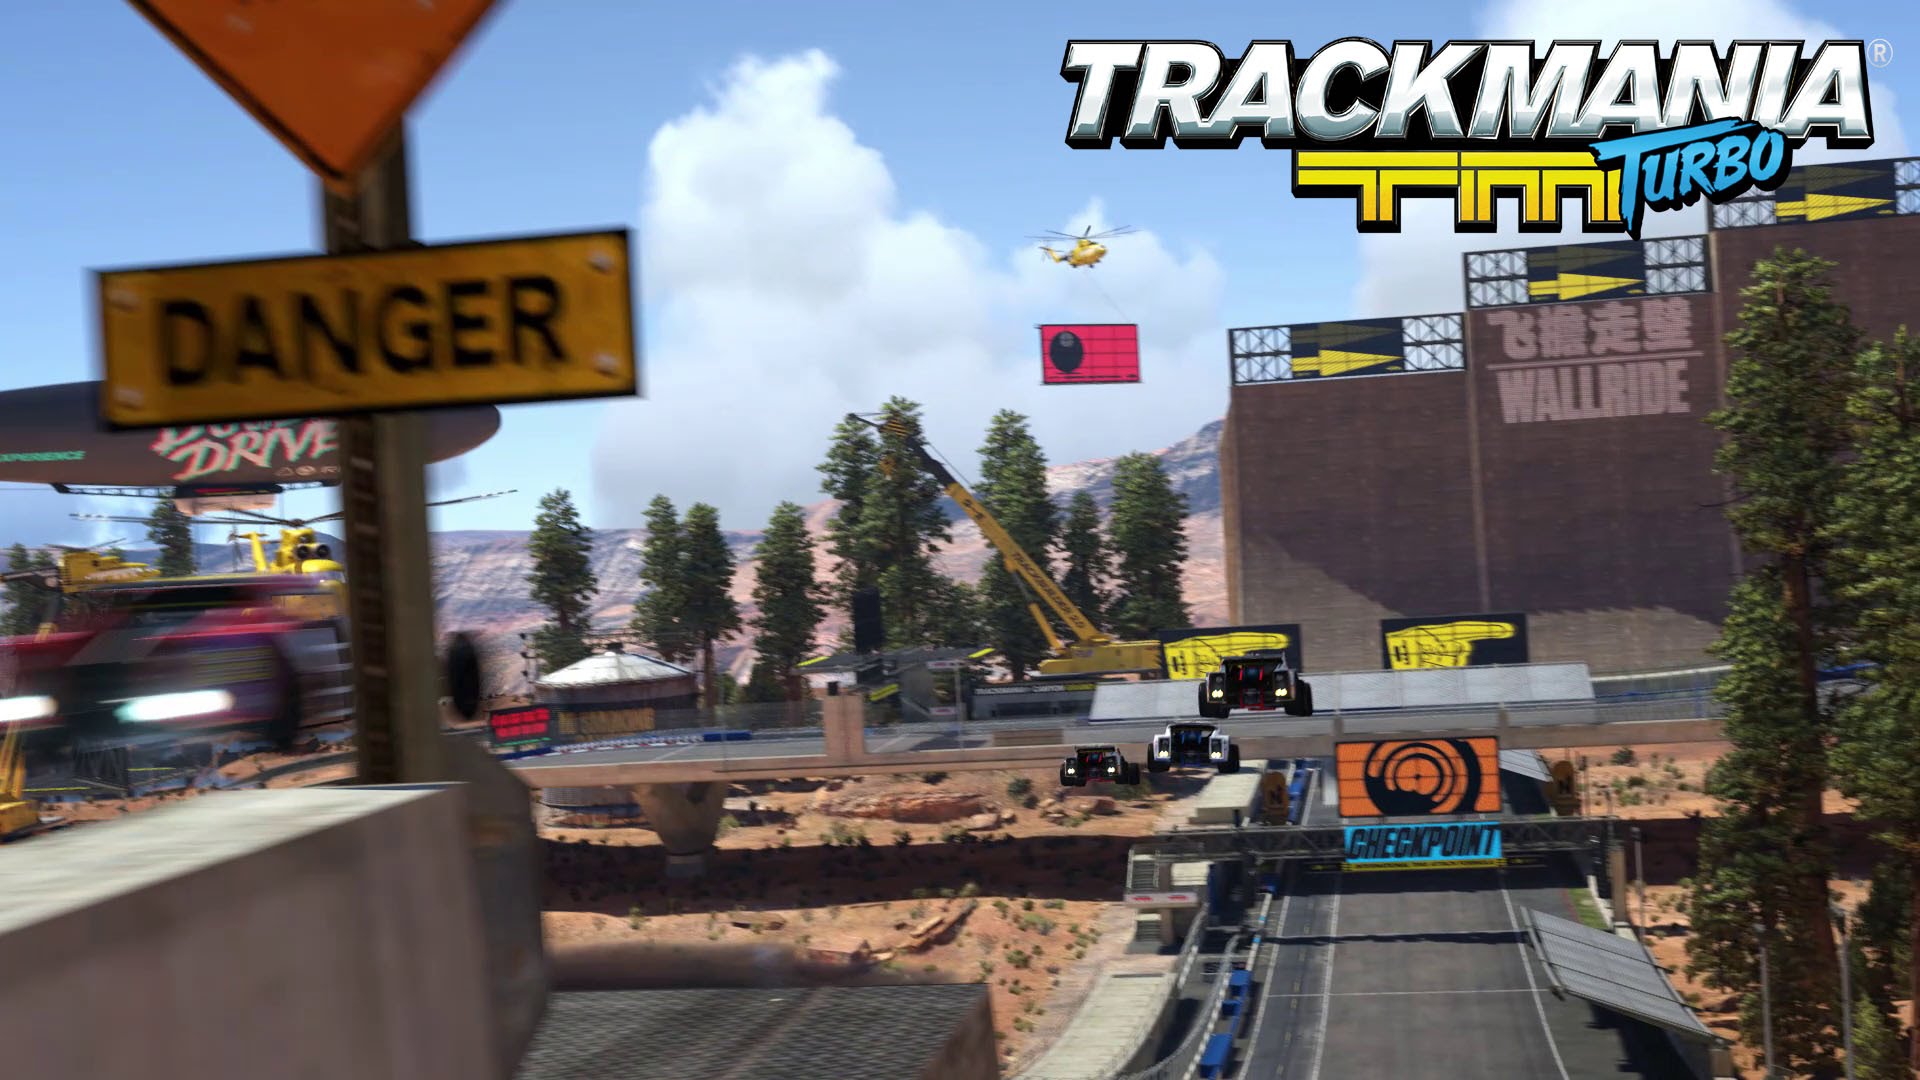 Trackmania Turbo Open Beta Trailer – Test your skills on PS4 & X1!